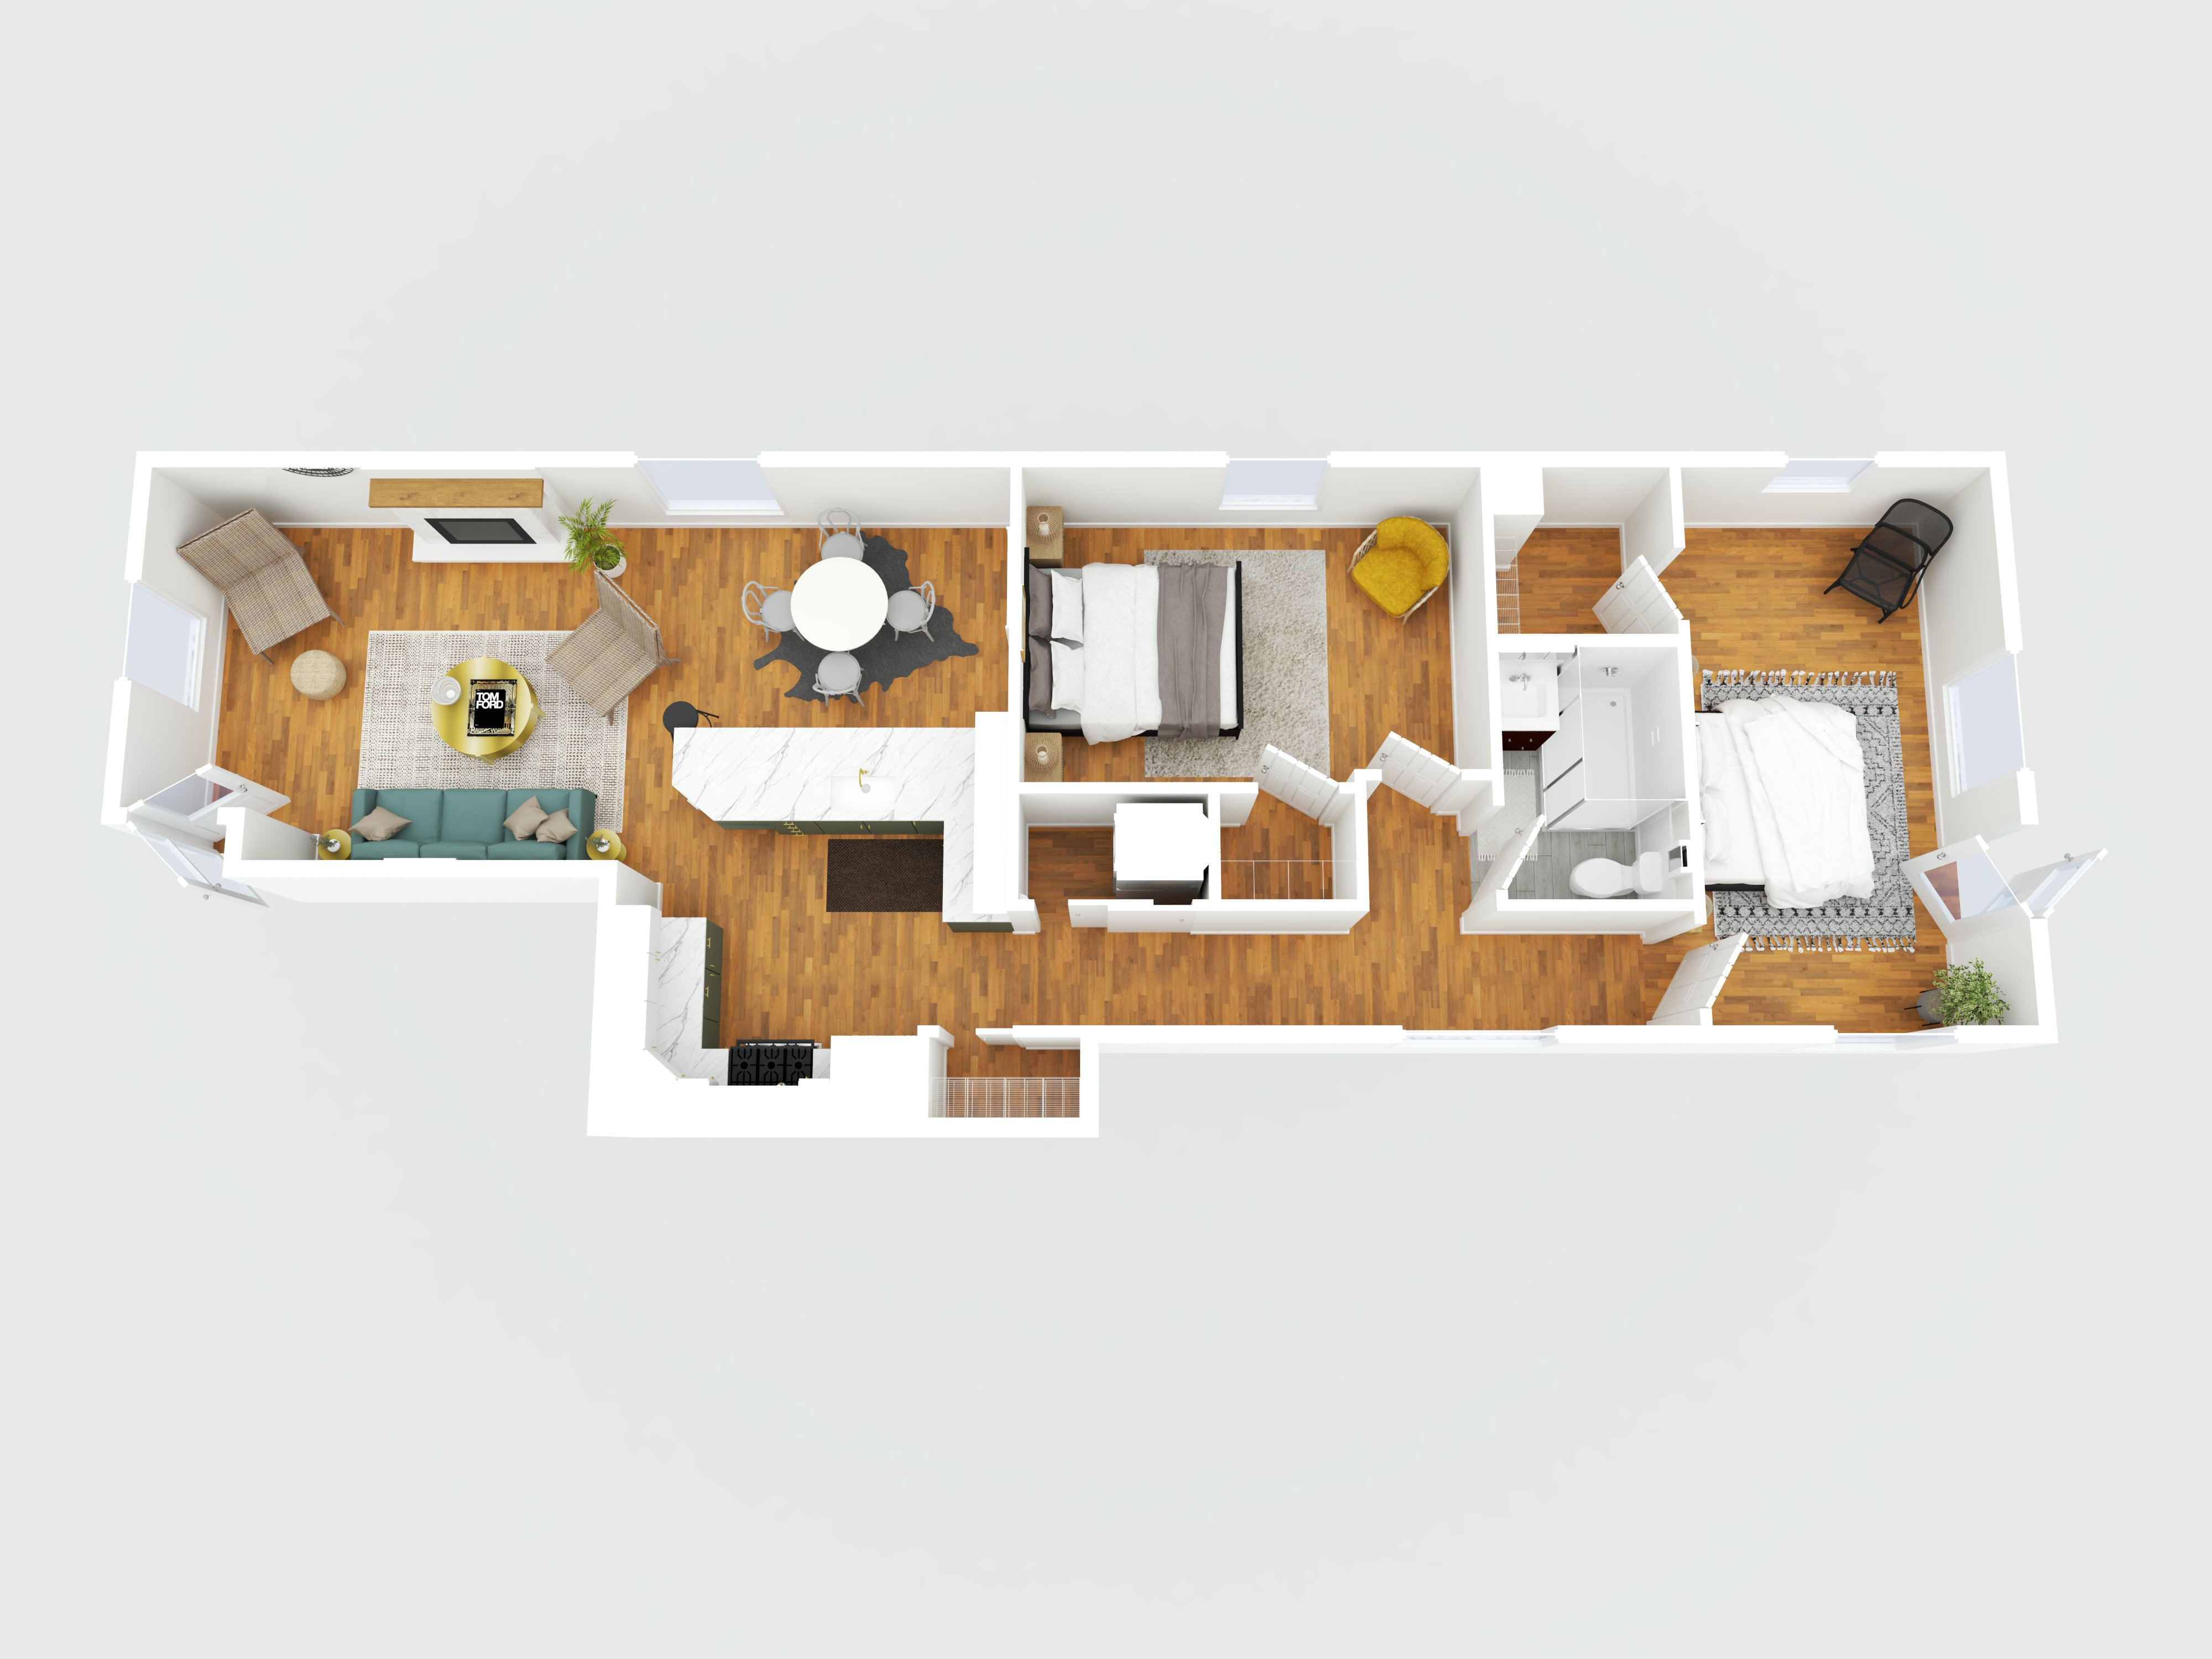 graphic of a 3D floor plan used as reference.